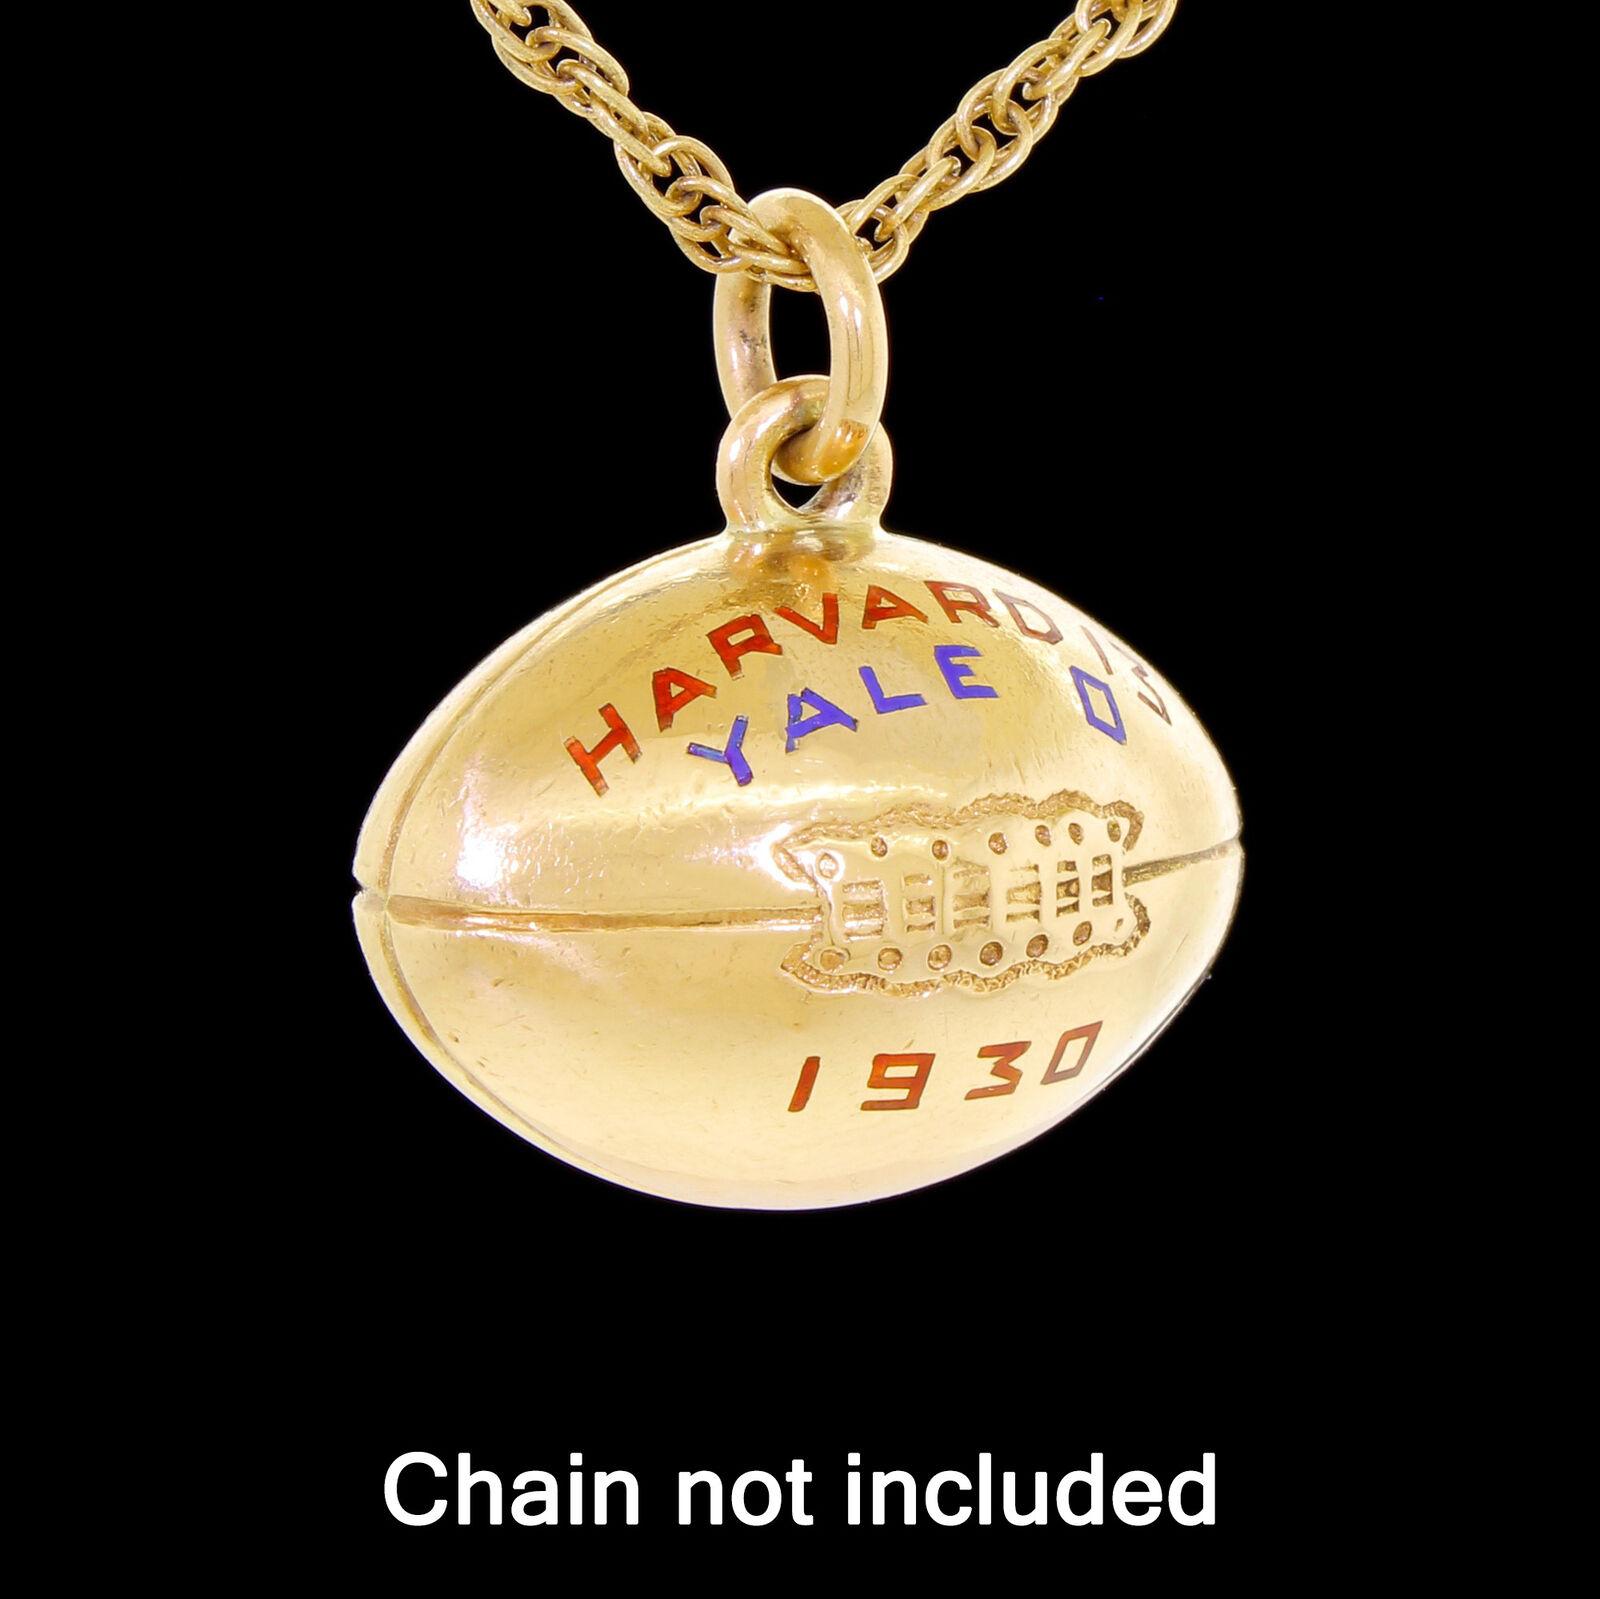 Details and Condition: 
We are proud to present this wonderful Art Deco 1930 / 1931 14k Yellow gold Harvard & Yale university commemorative charm.
This piece was made for the manager after Harvard beat Yale by a landslide  - Harvard 13 Yale 0